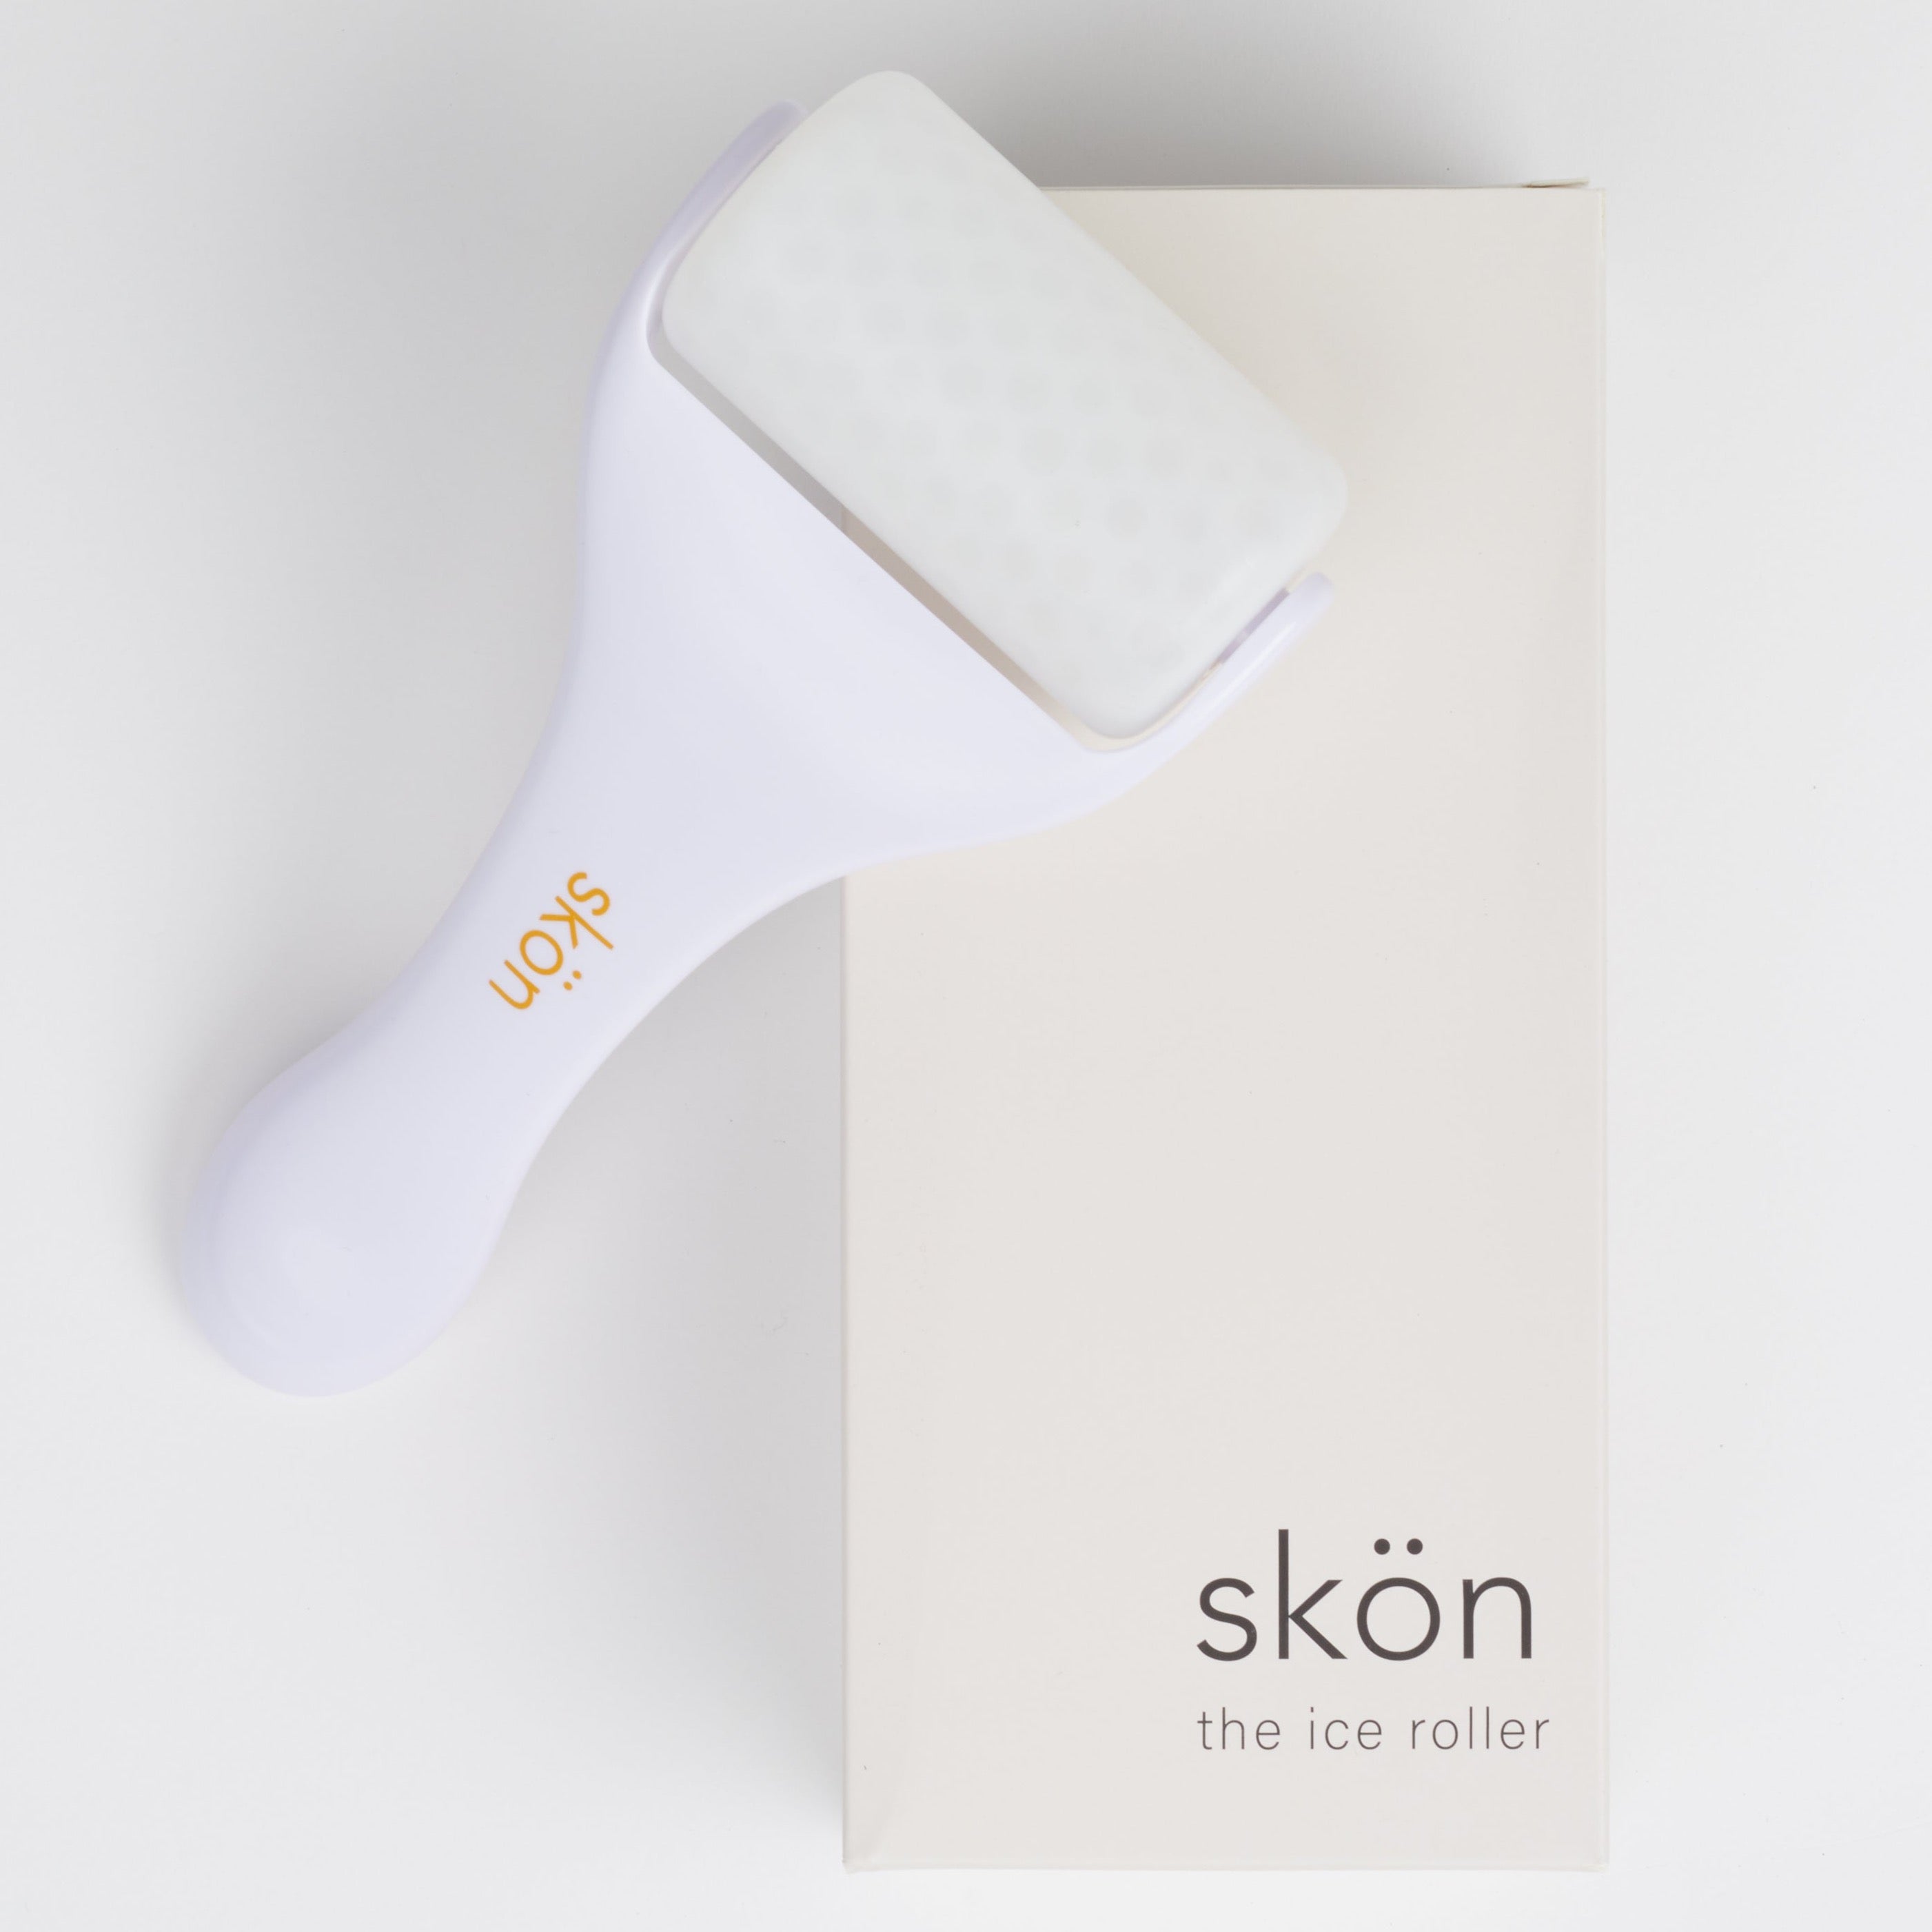 A white ice roller with an tan-orange colored skön logo on the handle sitting atop a cream colored box that says &quot;skön the ice roller&quot; against a white background